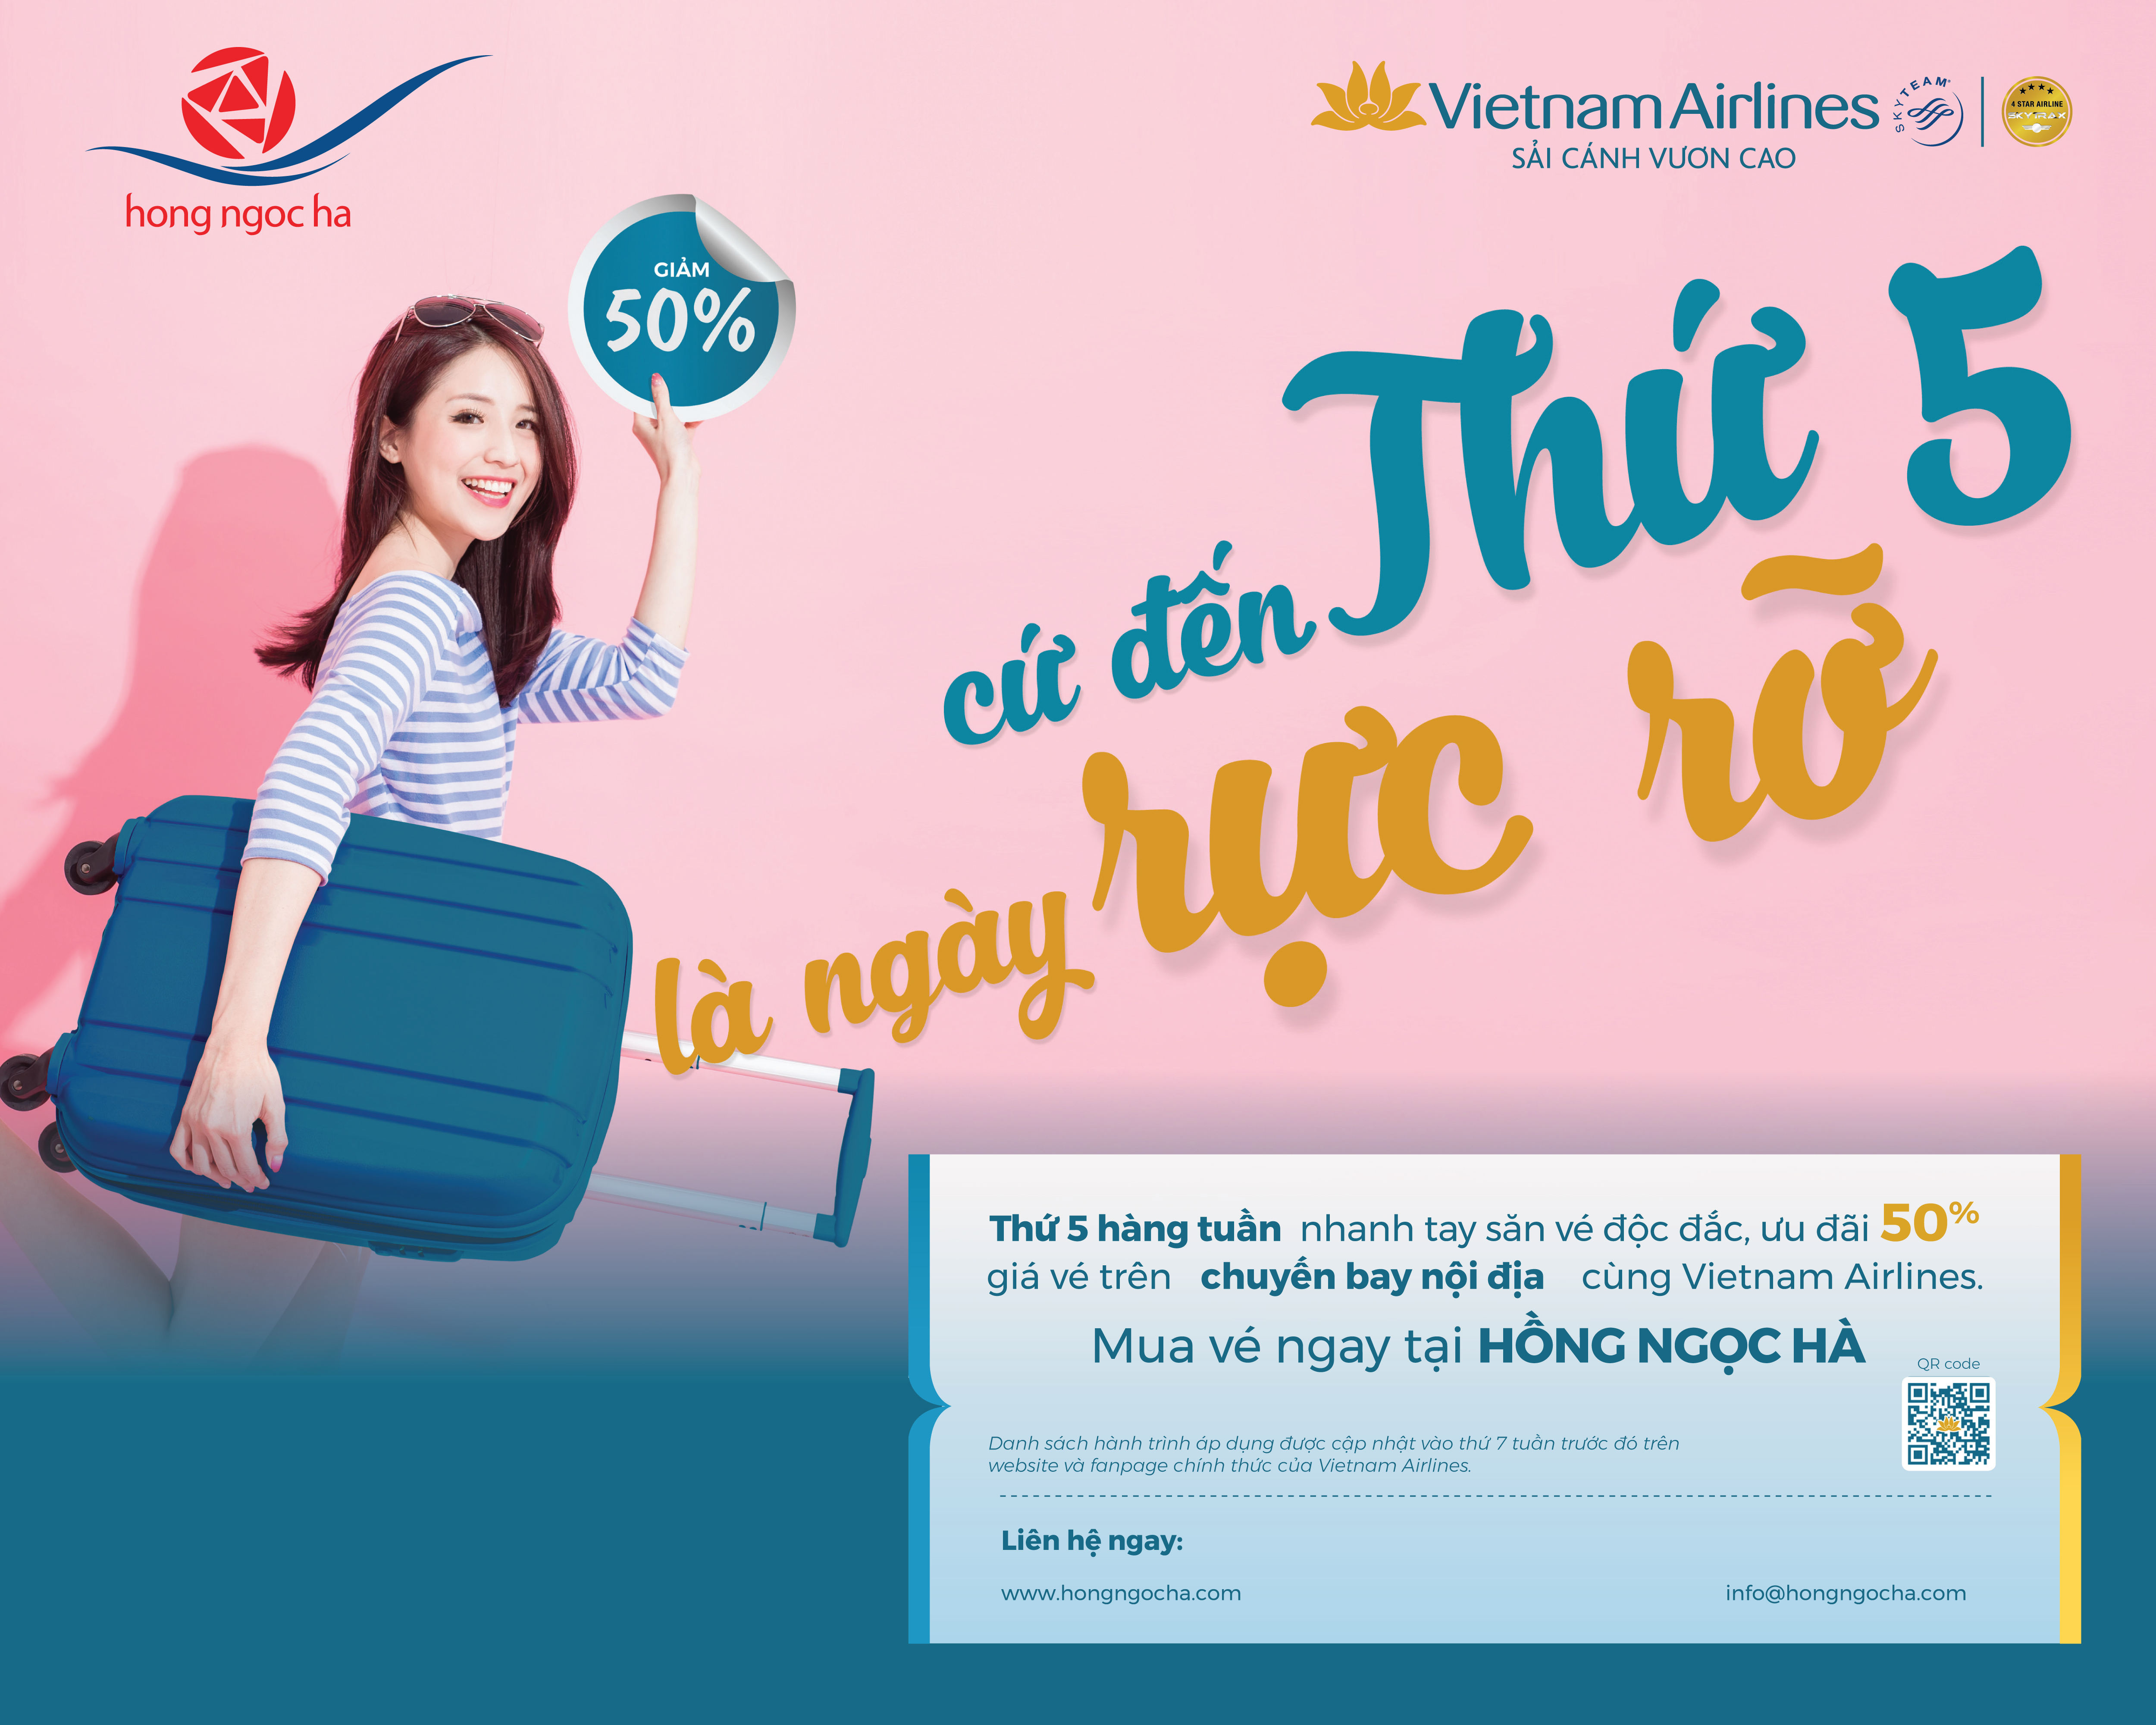 Brilliant Thursday with Vietnam Airlines